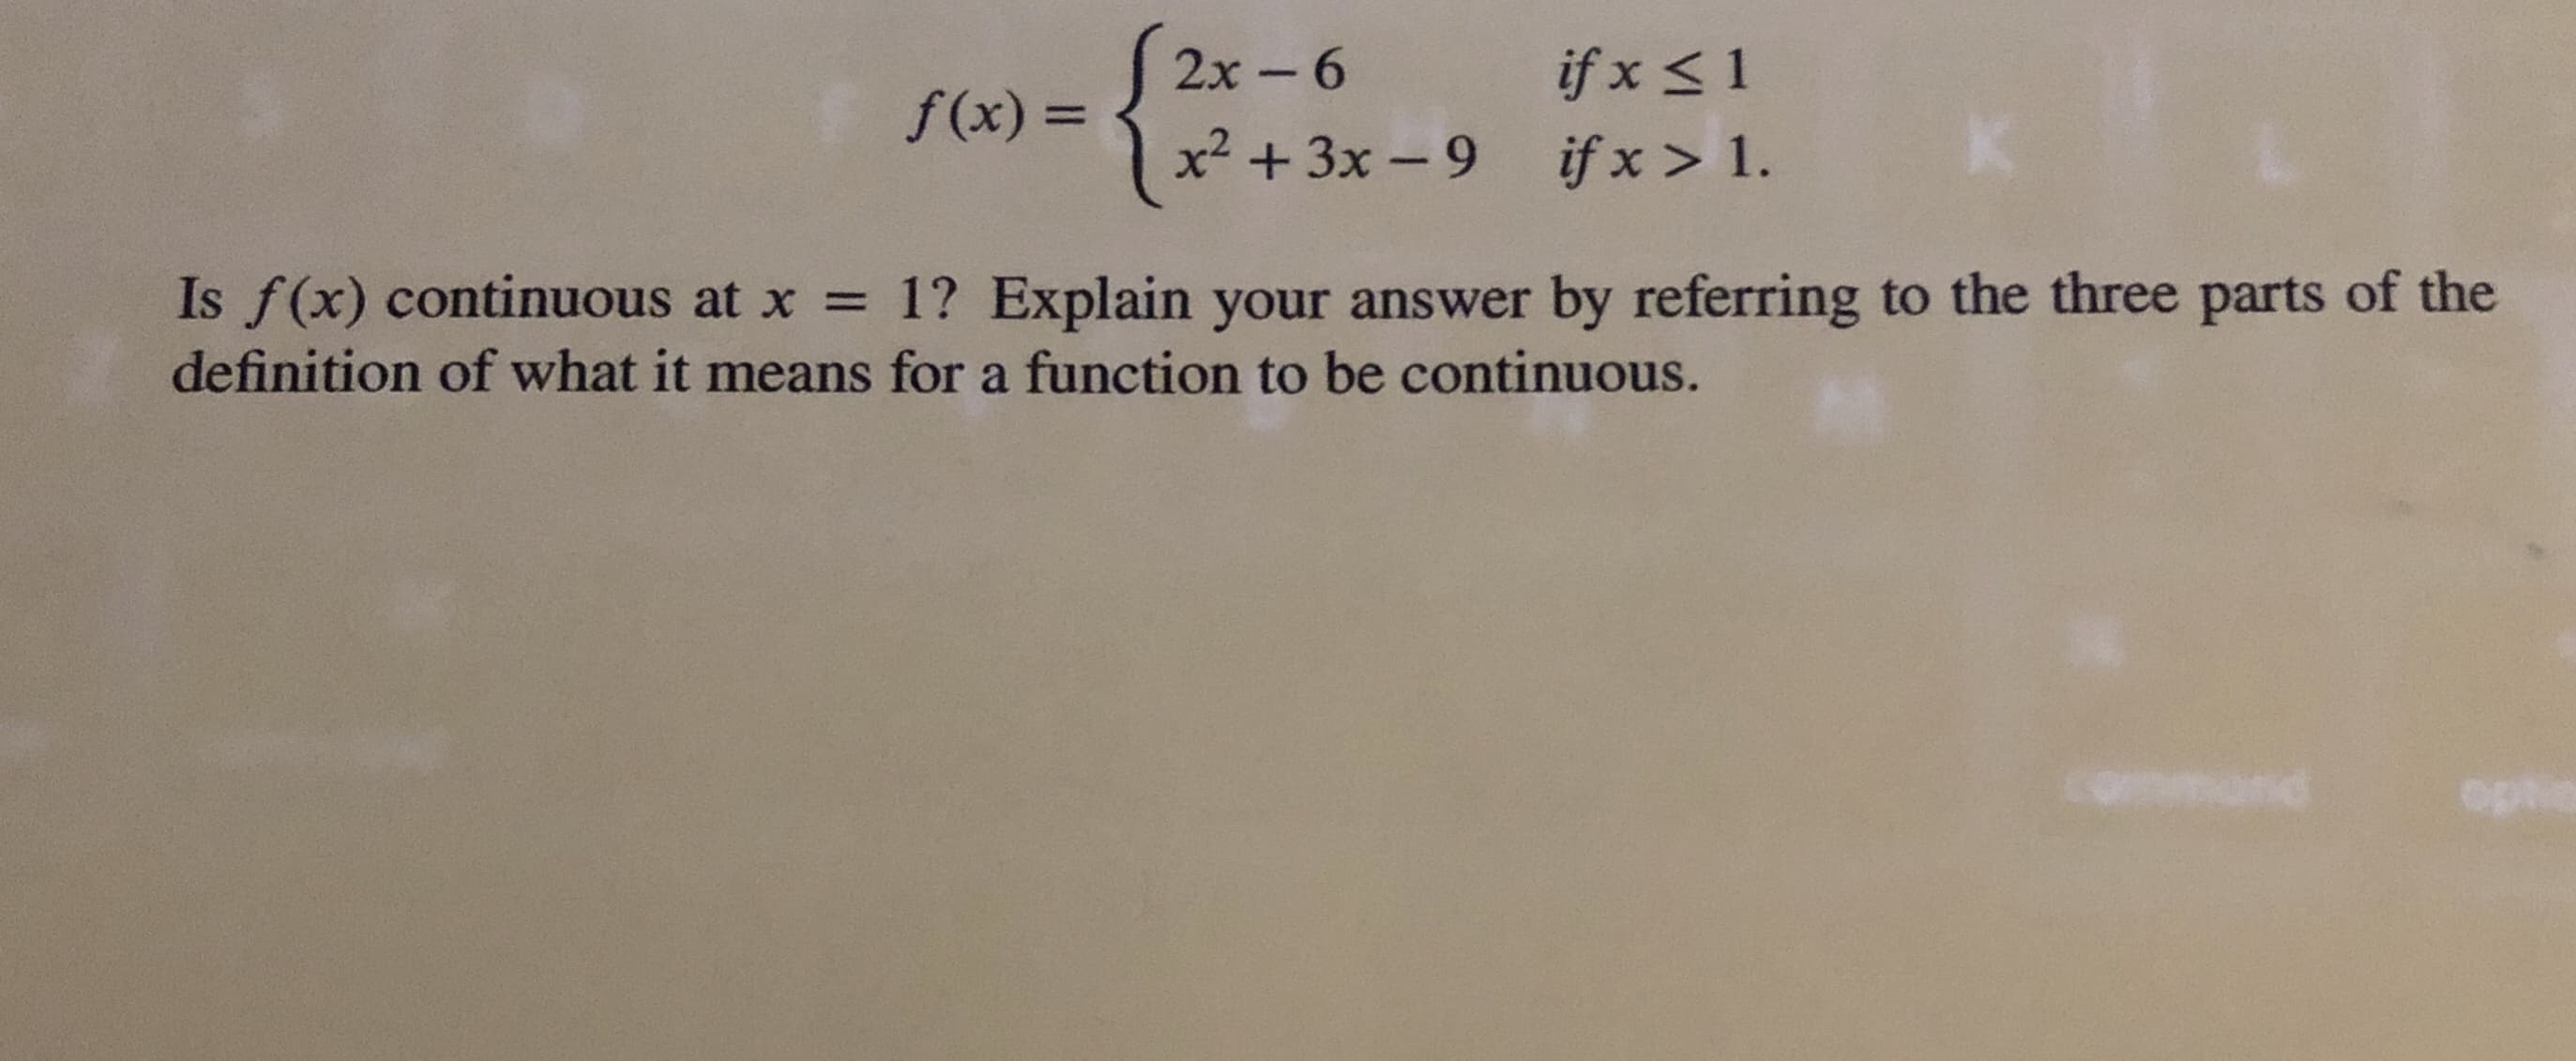 2x-6
x2 + 3x-9
if x < 1
がx > 1.
f(x) =
is f(x) continuous at x = 1? Explain your answer by referring to the three parts of the
definition of what it means for a function to be continuous.
